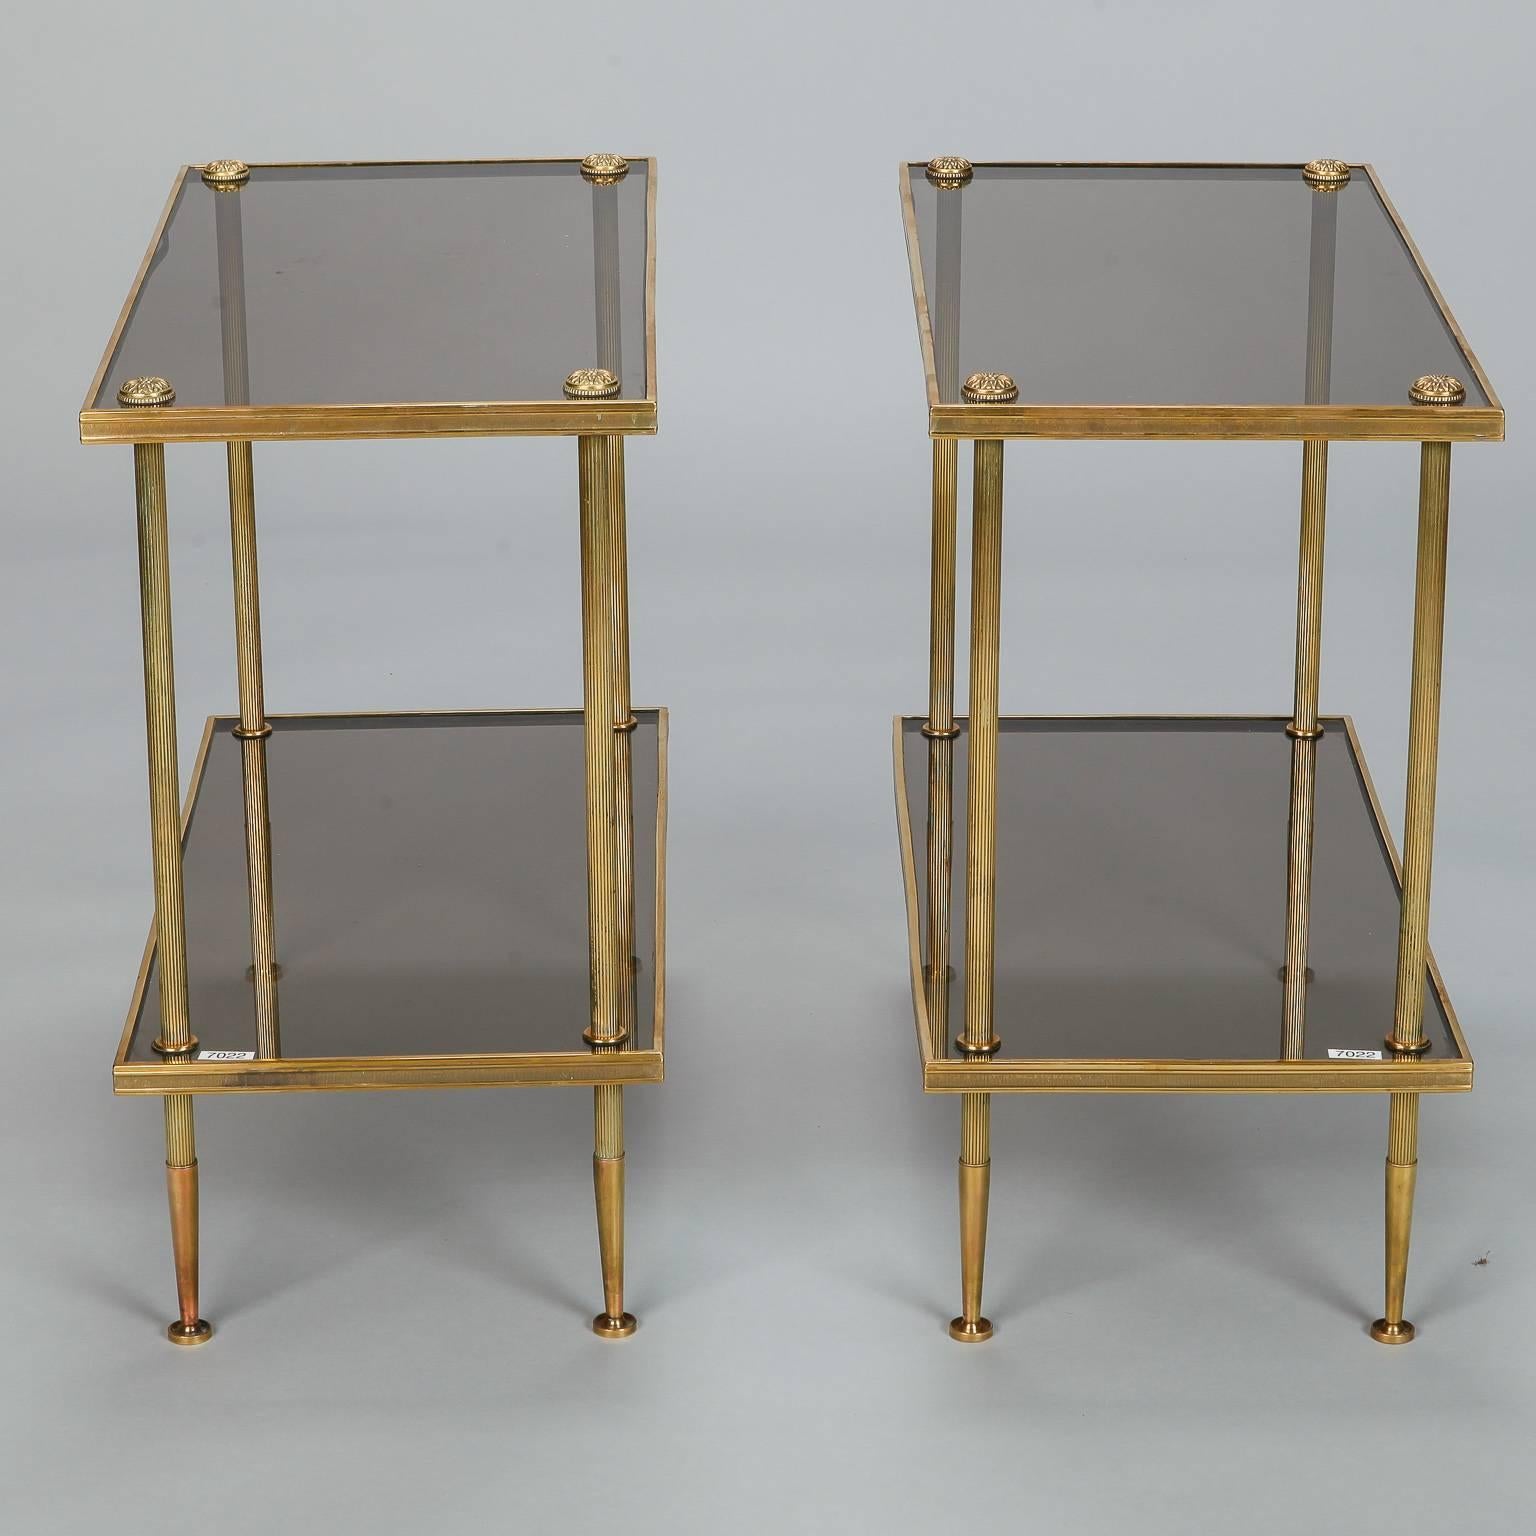 Pair mid century two tier tables by Jacques Quinet dating from the 1960s. Brass frames have reeded, tapered legs, decorative hardware and smoked glass shelves. Sold and priced as a pair. 

Dimensions:
21.5” H x 24” W x 12” D

Retail:
$4,295.00